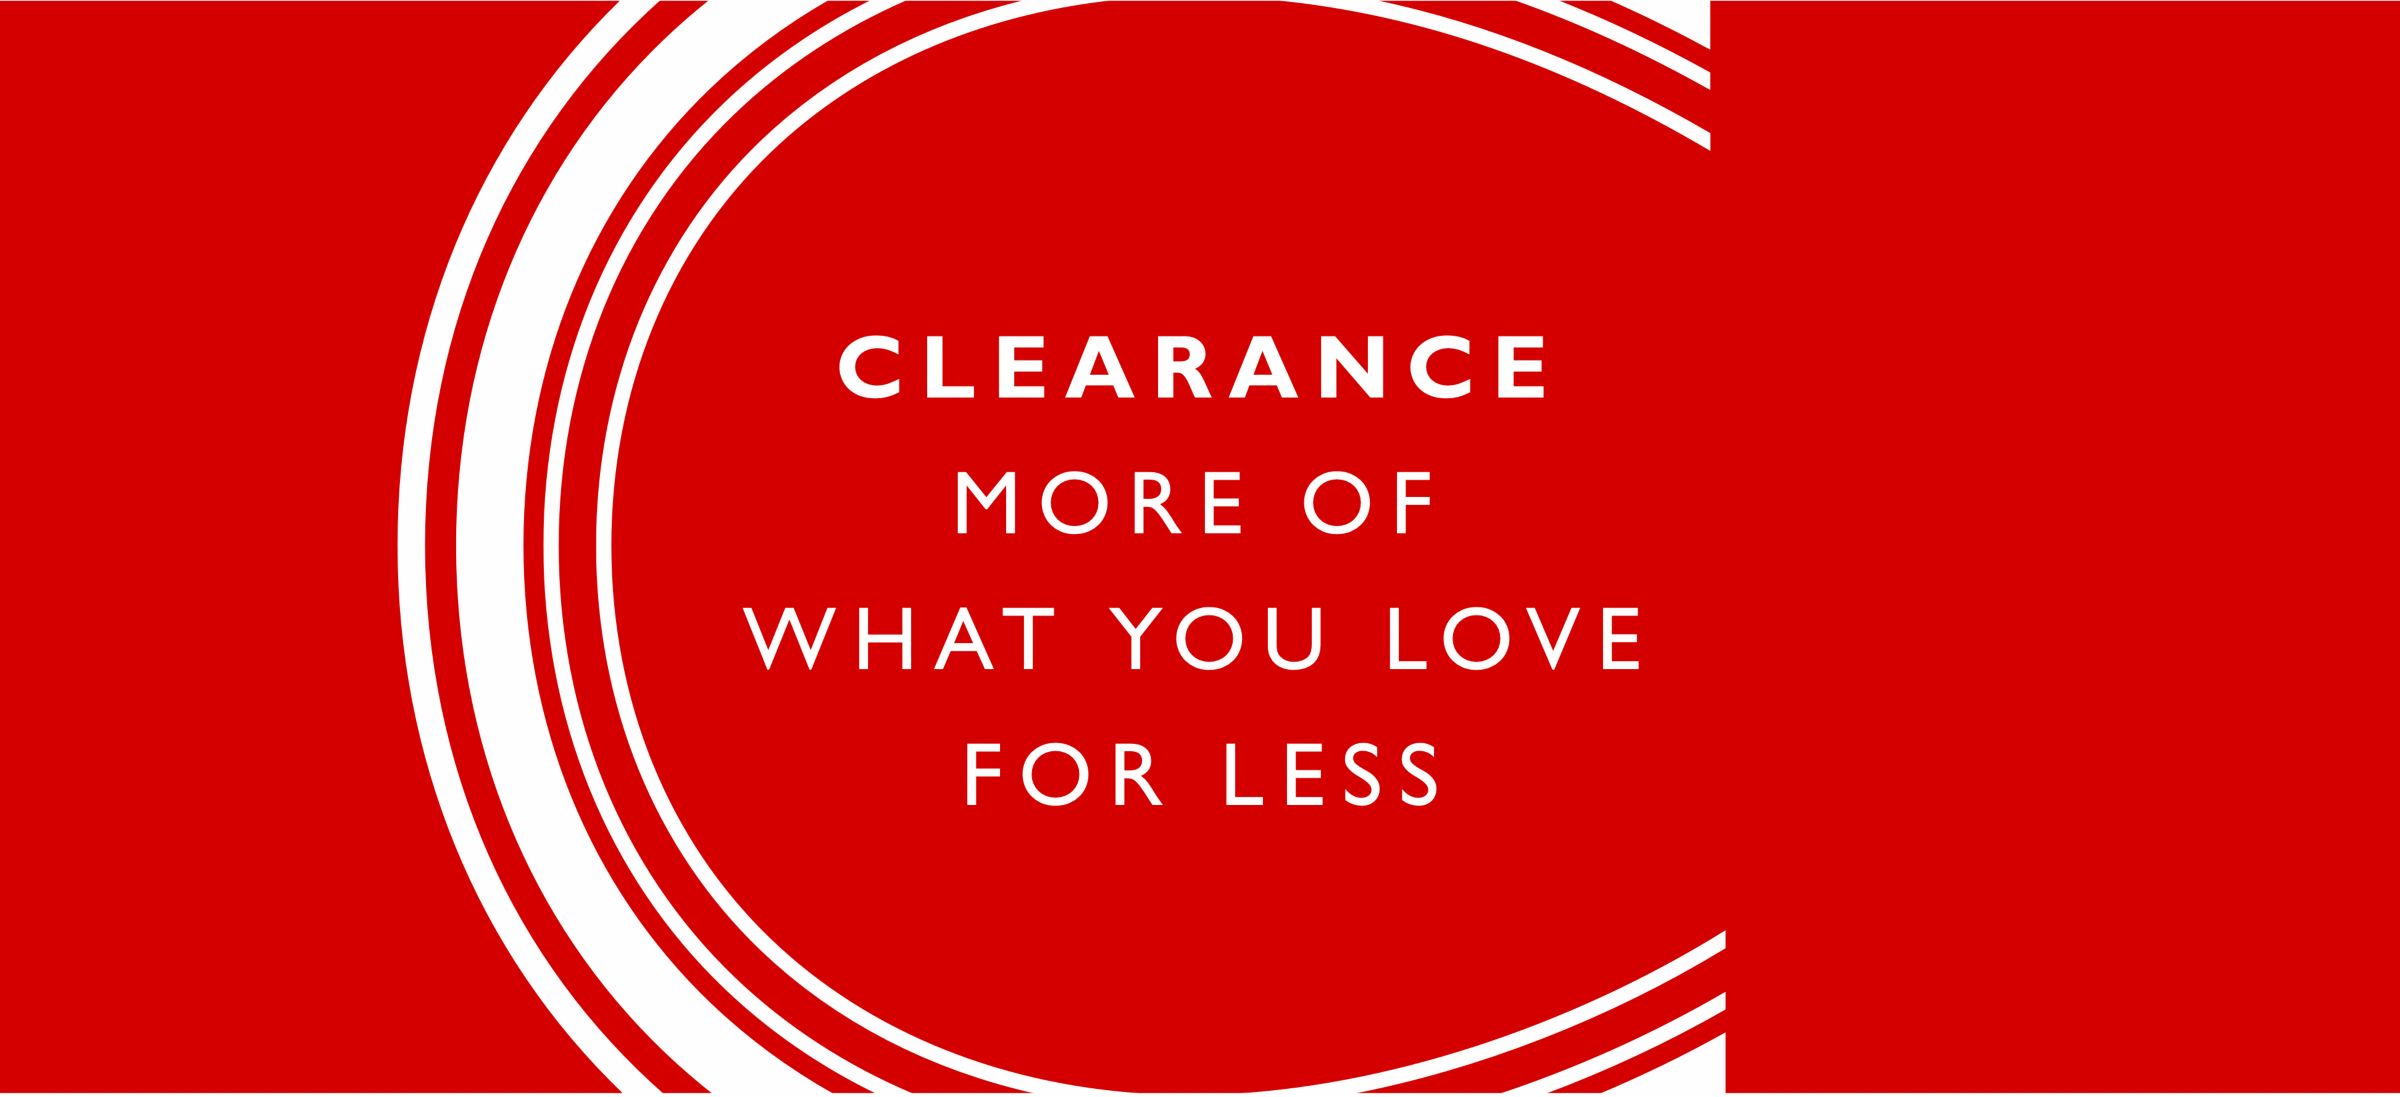 Clearance Offers Find Clearance Bargains John Lewis Partners